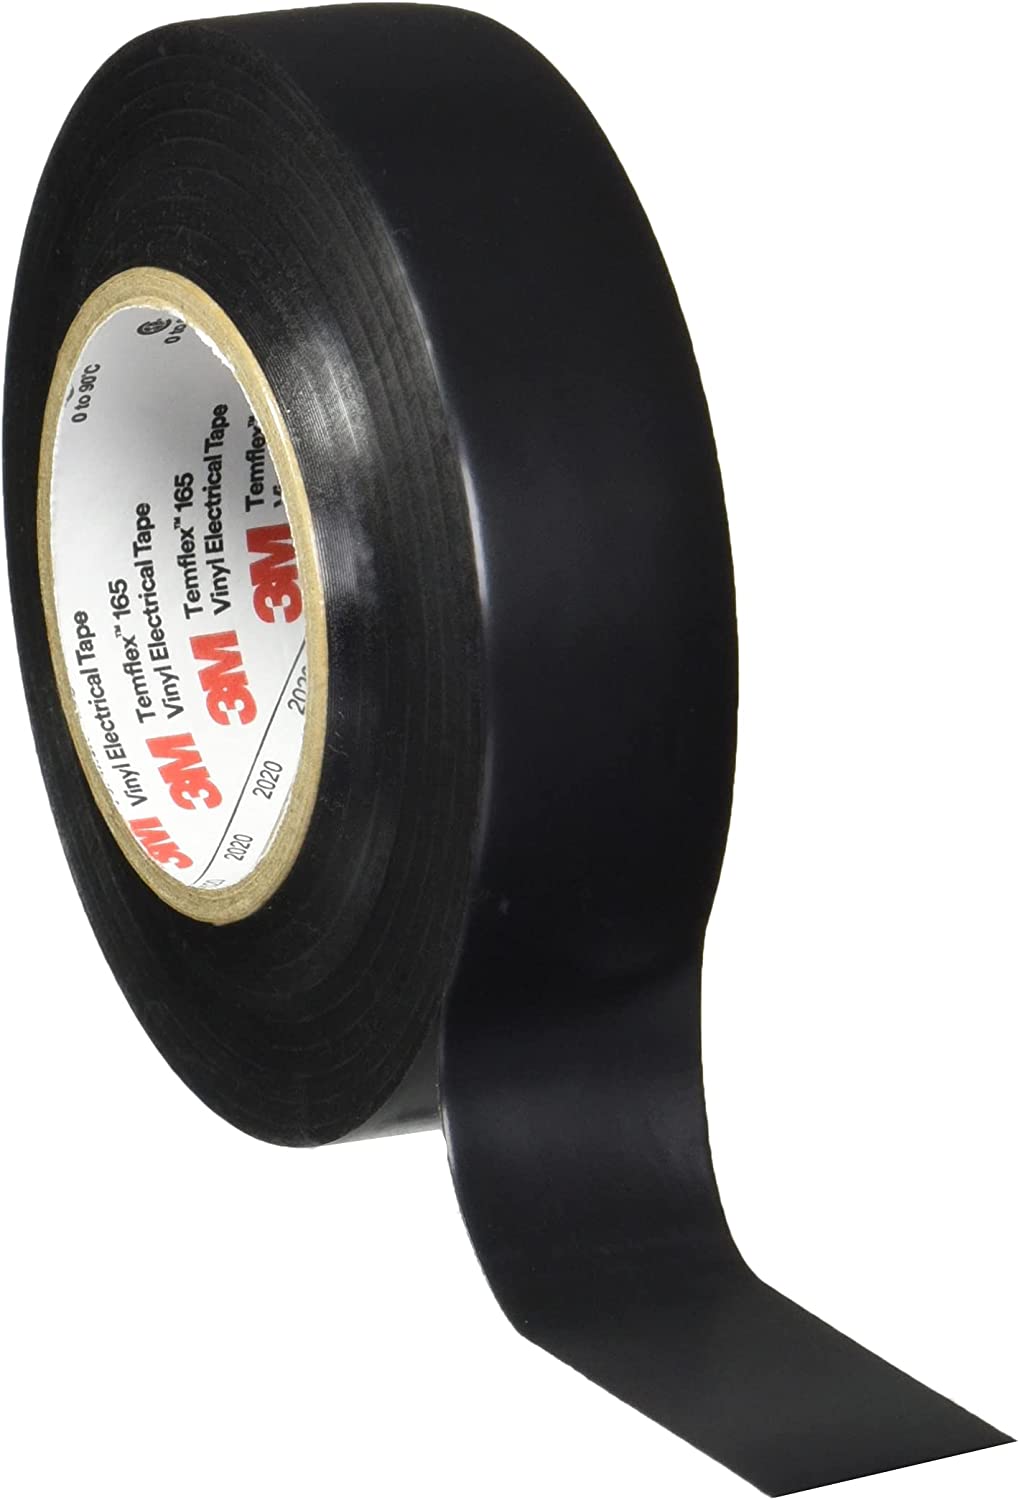 3M Vinyl Electrical Tape 60 Foot Roll, Width: 3/4 Inch, RoHS and UL